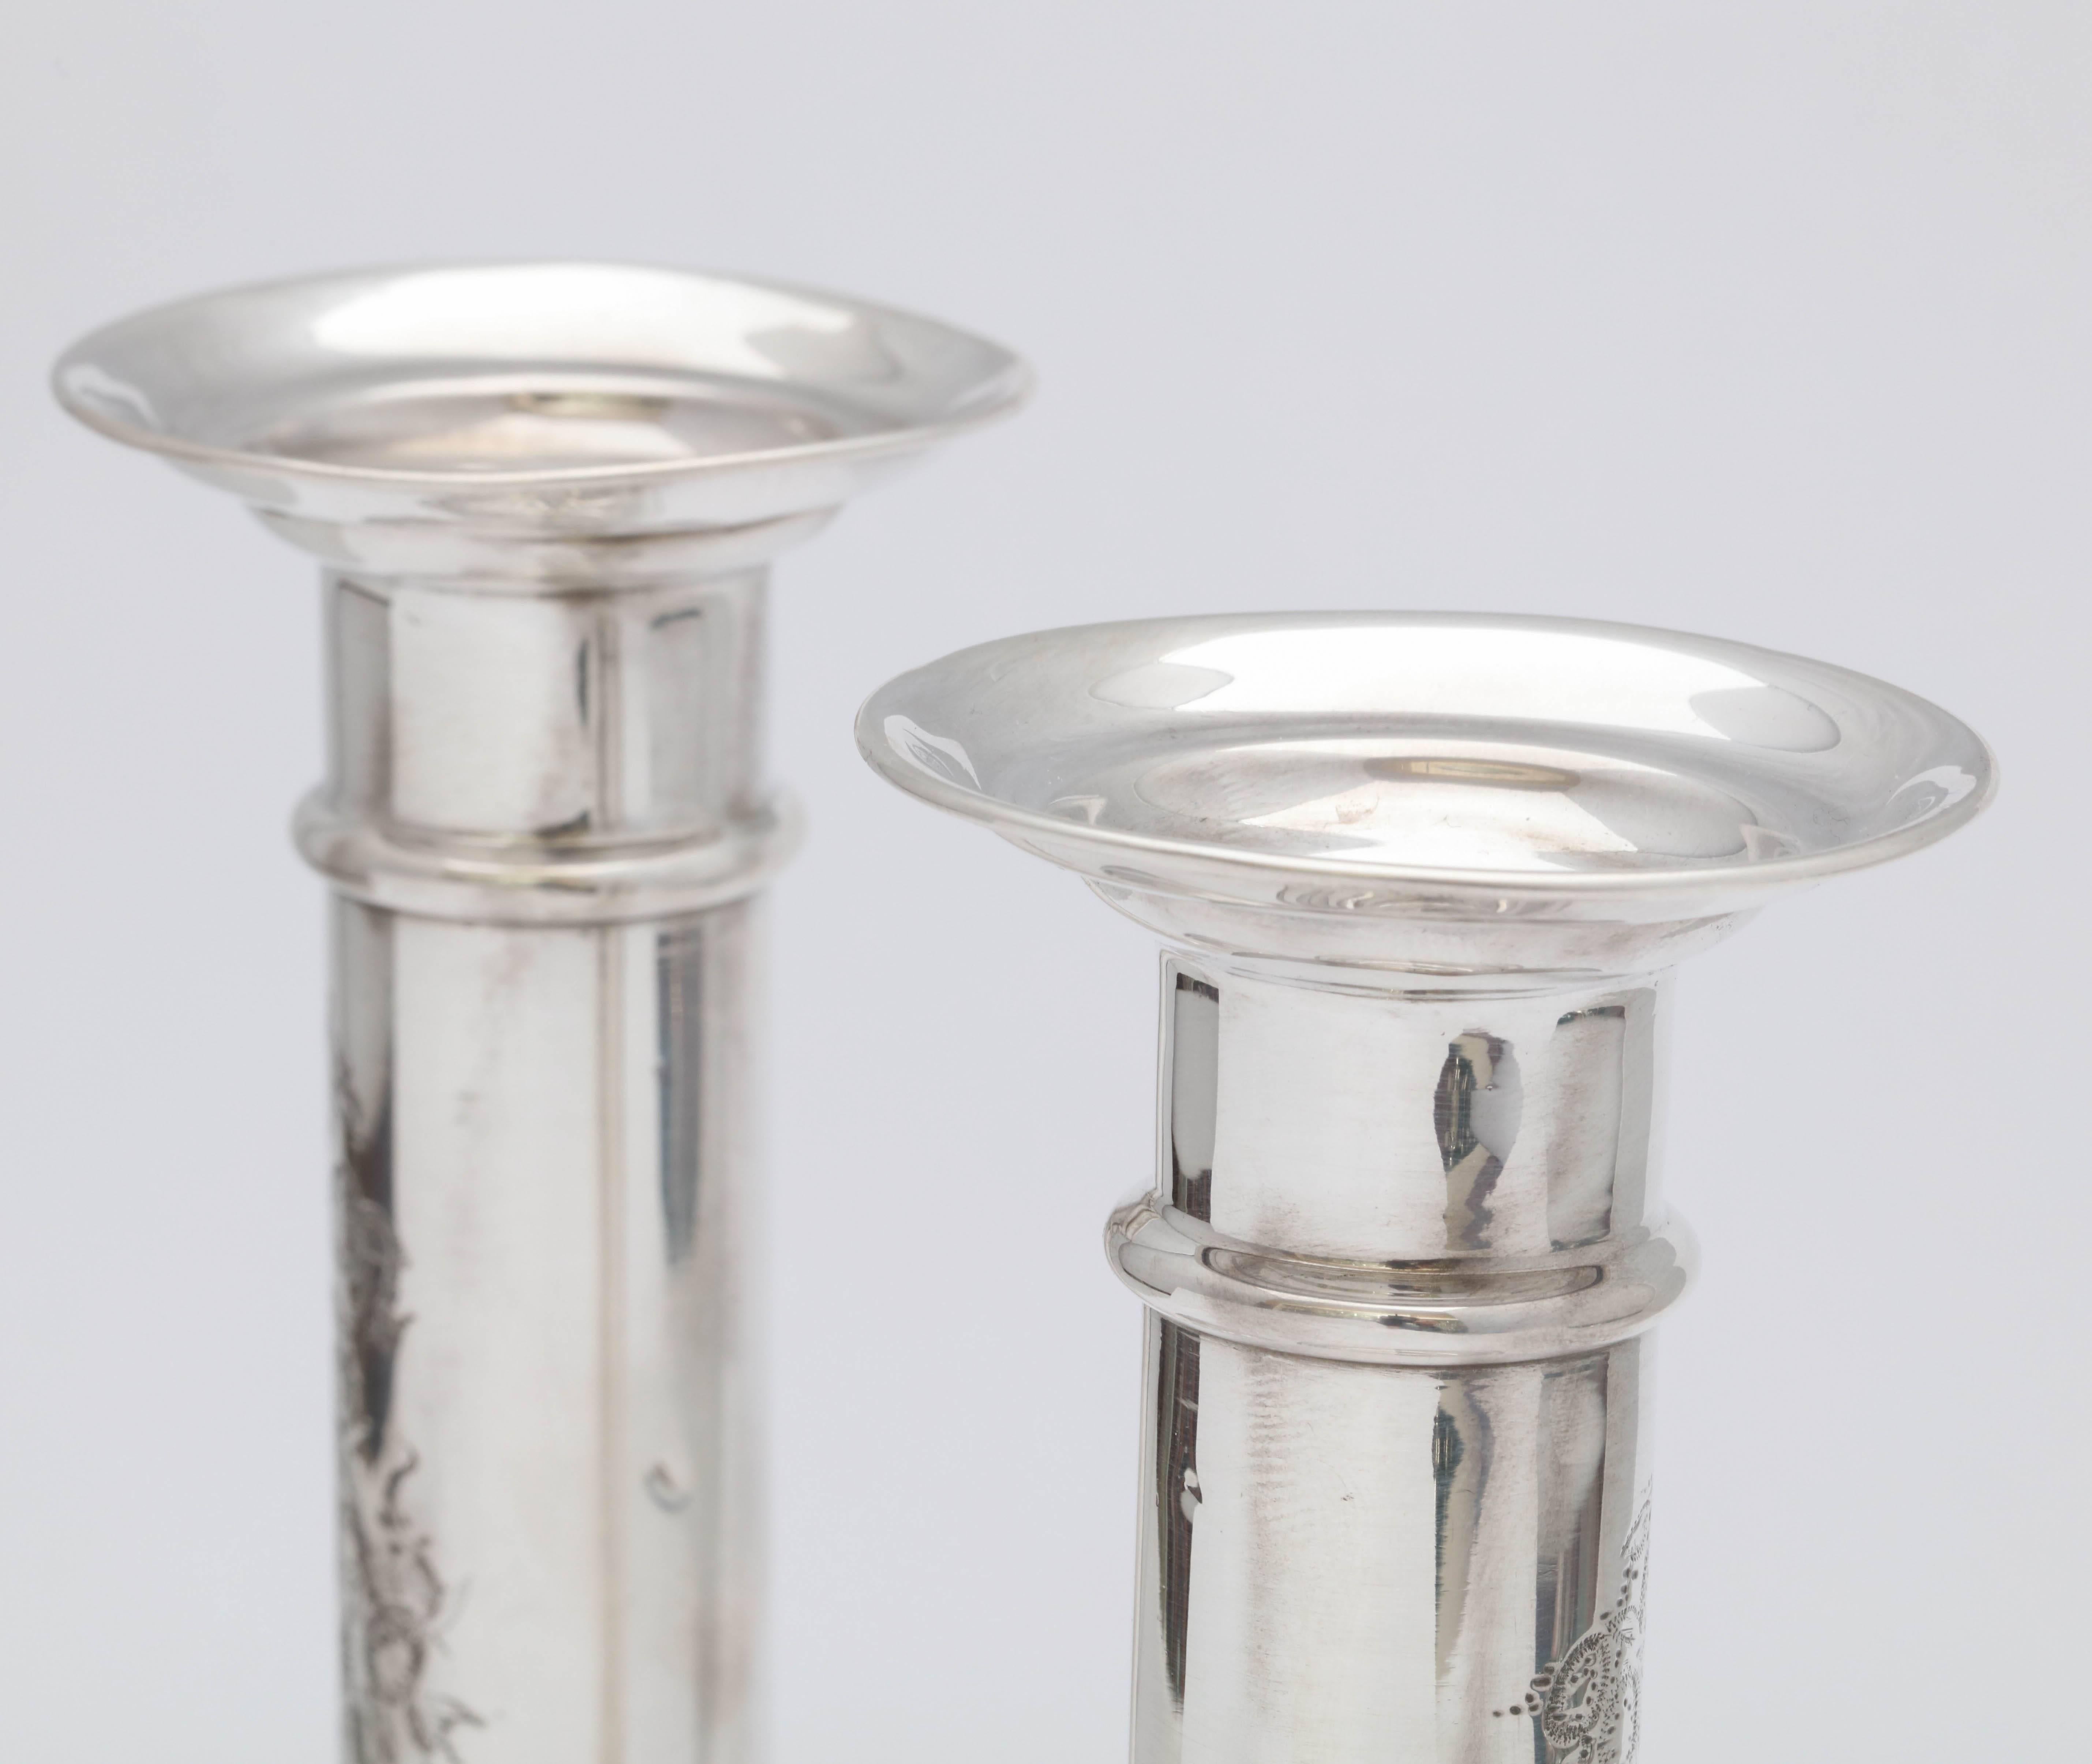 Pair of Edwardian Sterling Silver Column-Form Candlesticks 5